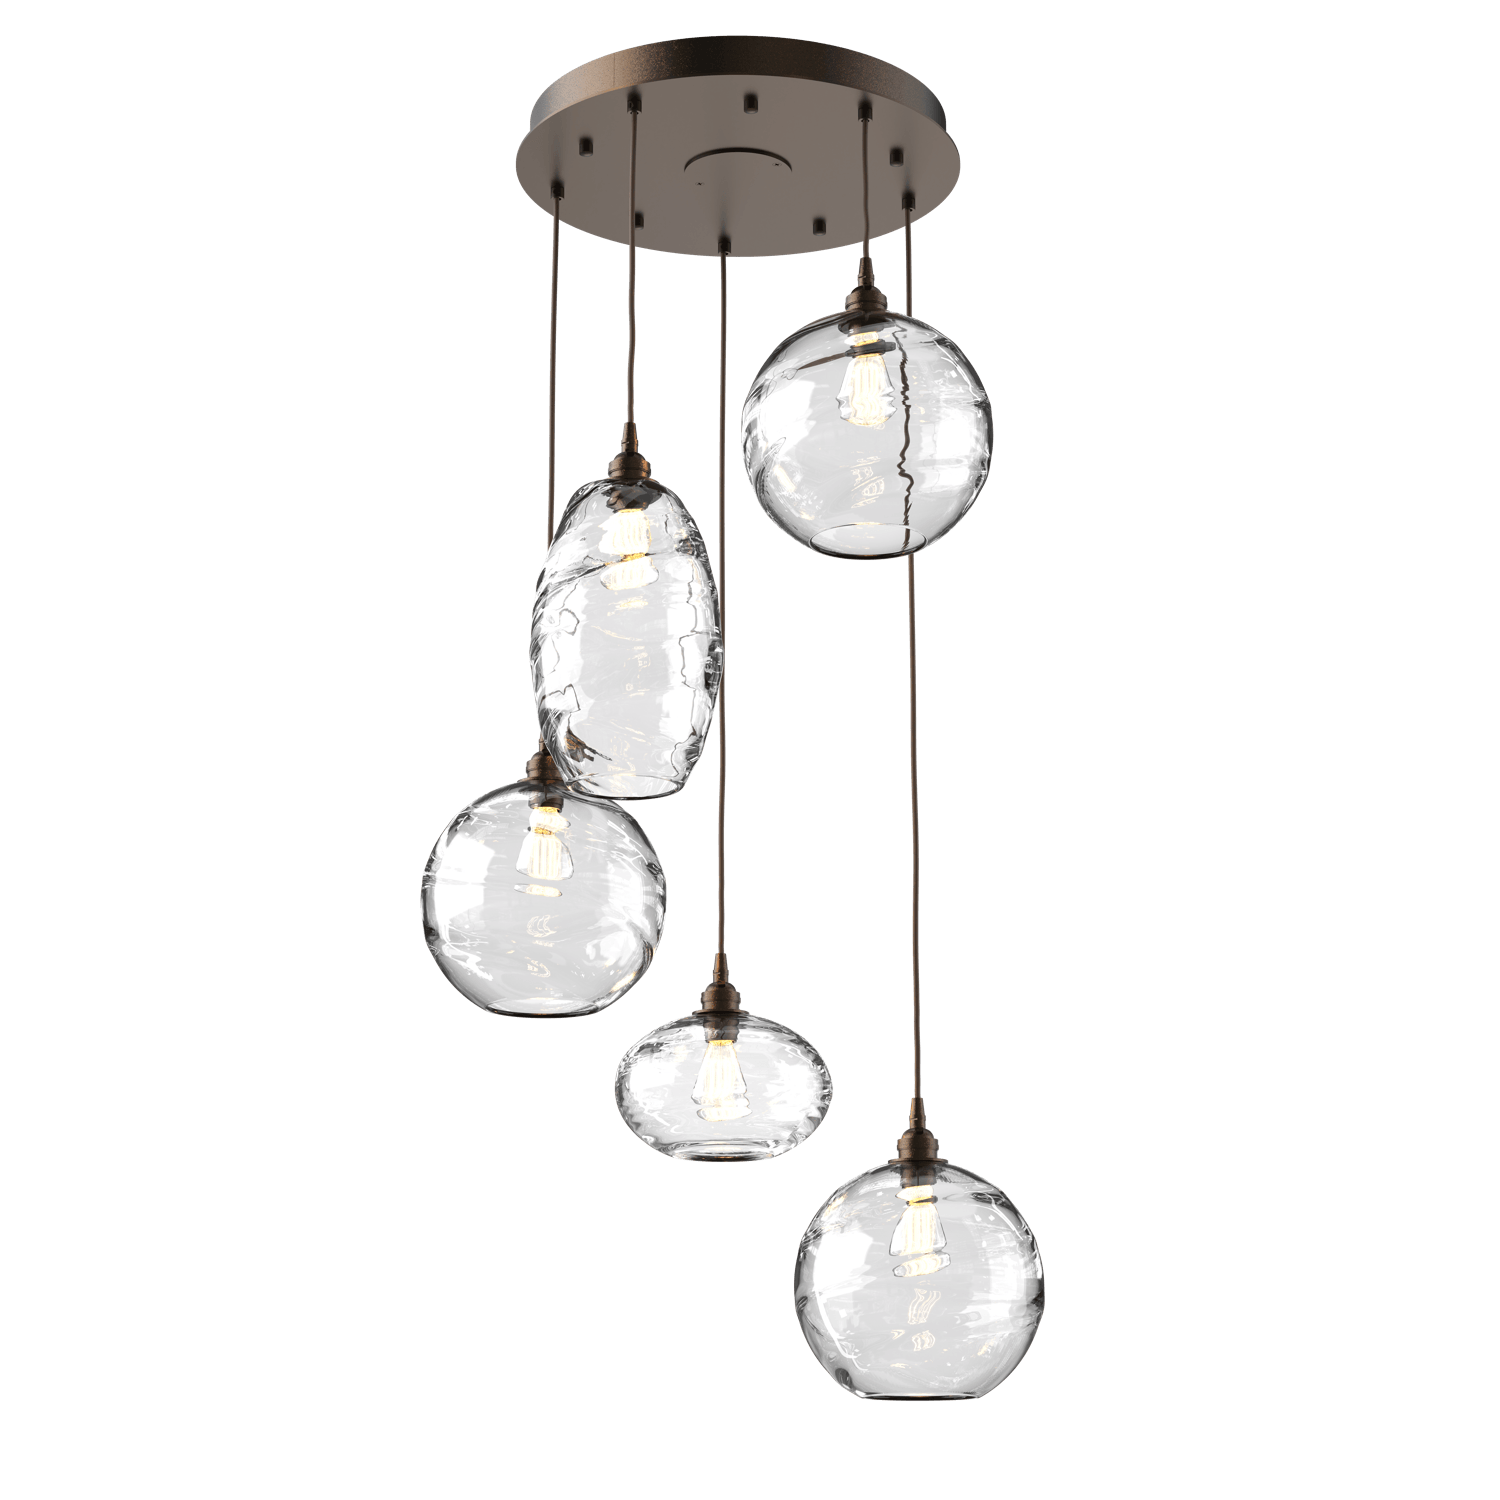 CHB0048-05-FB-OC-Hammerton-Studio-Optic-Blown-Glass-Misto-5-light-round-pendant-chandelier-with-flat-bronze-finish-and-optic-clear-blown-glass-shades-and-incandescent-lamping